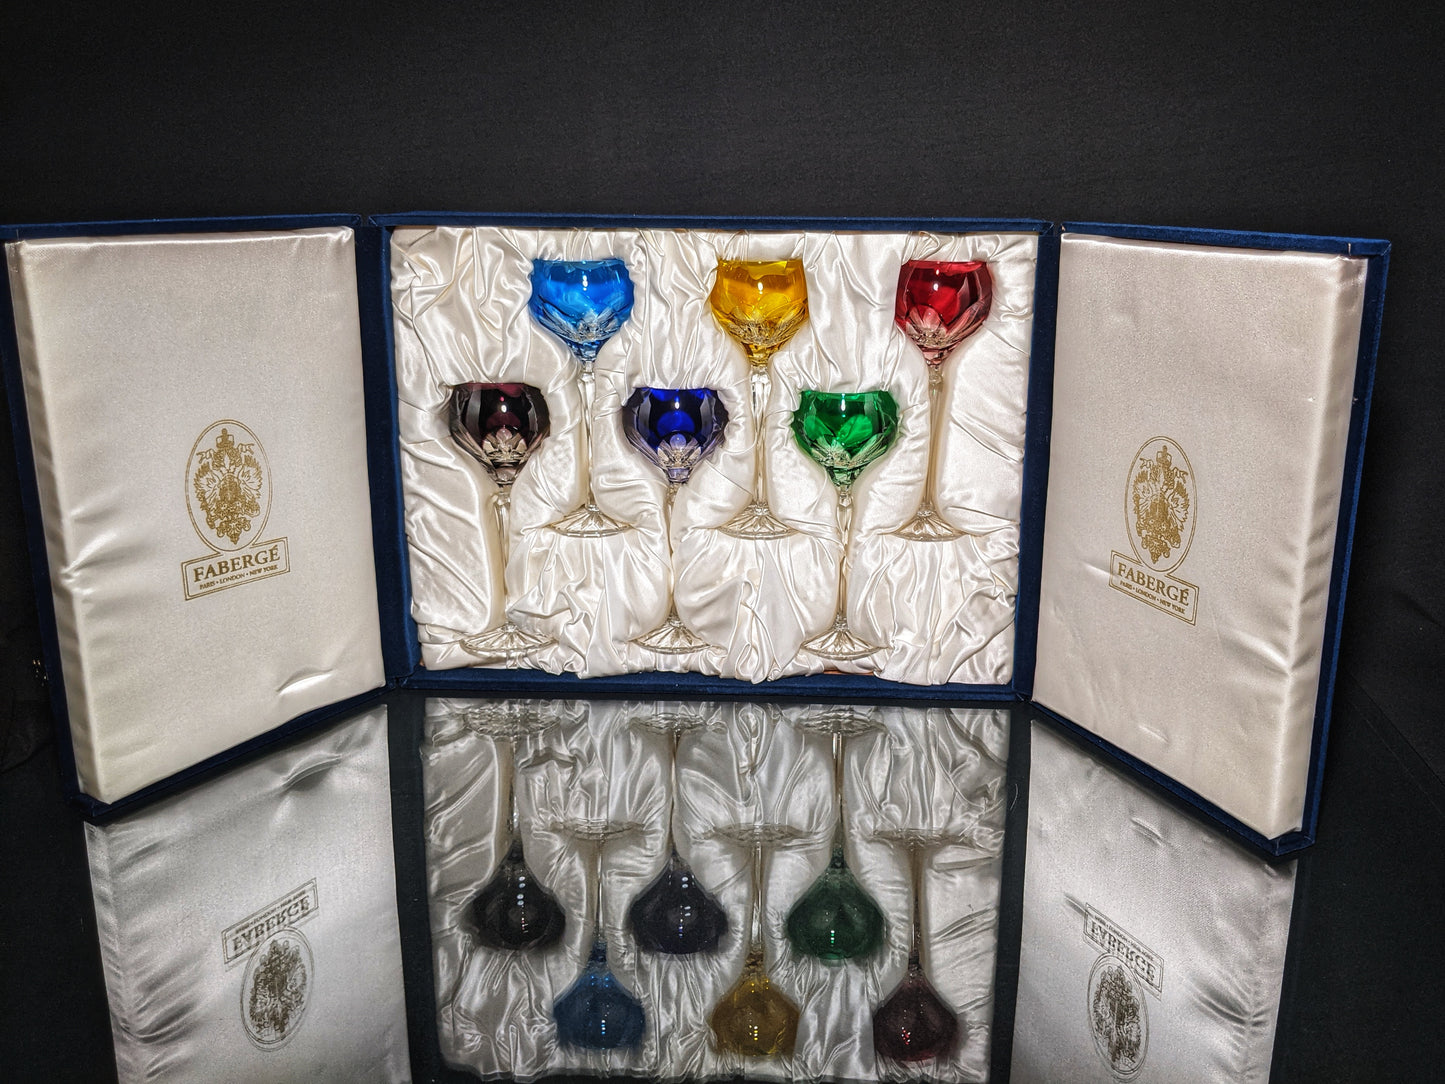 Faberge Colored Crystal Lausanne Hock Glasses. 8 1/2" H x 3 1/4" W